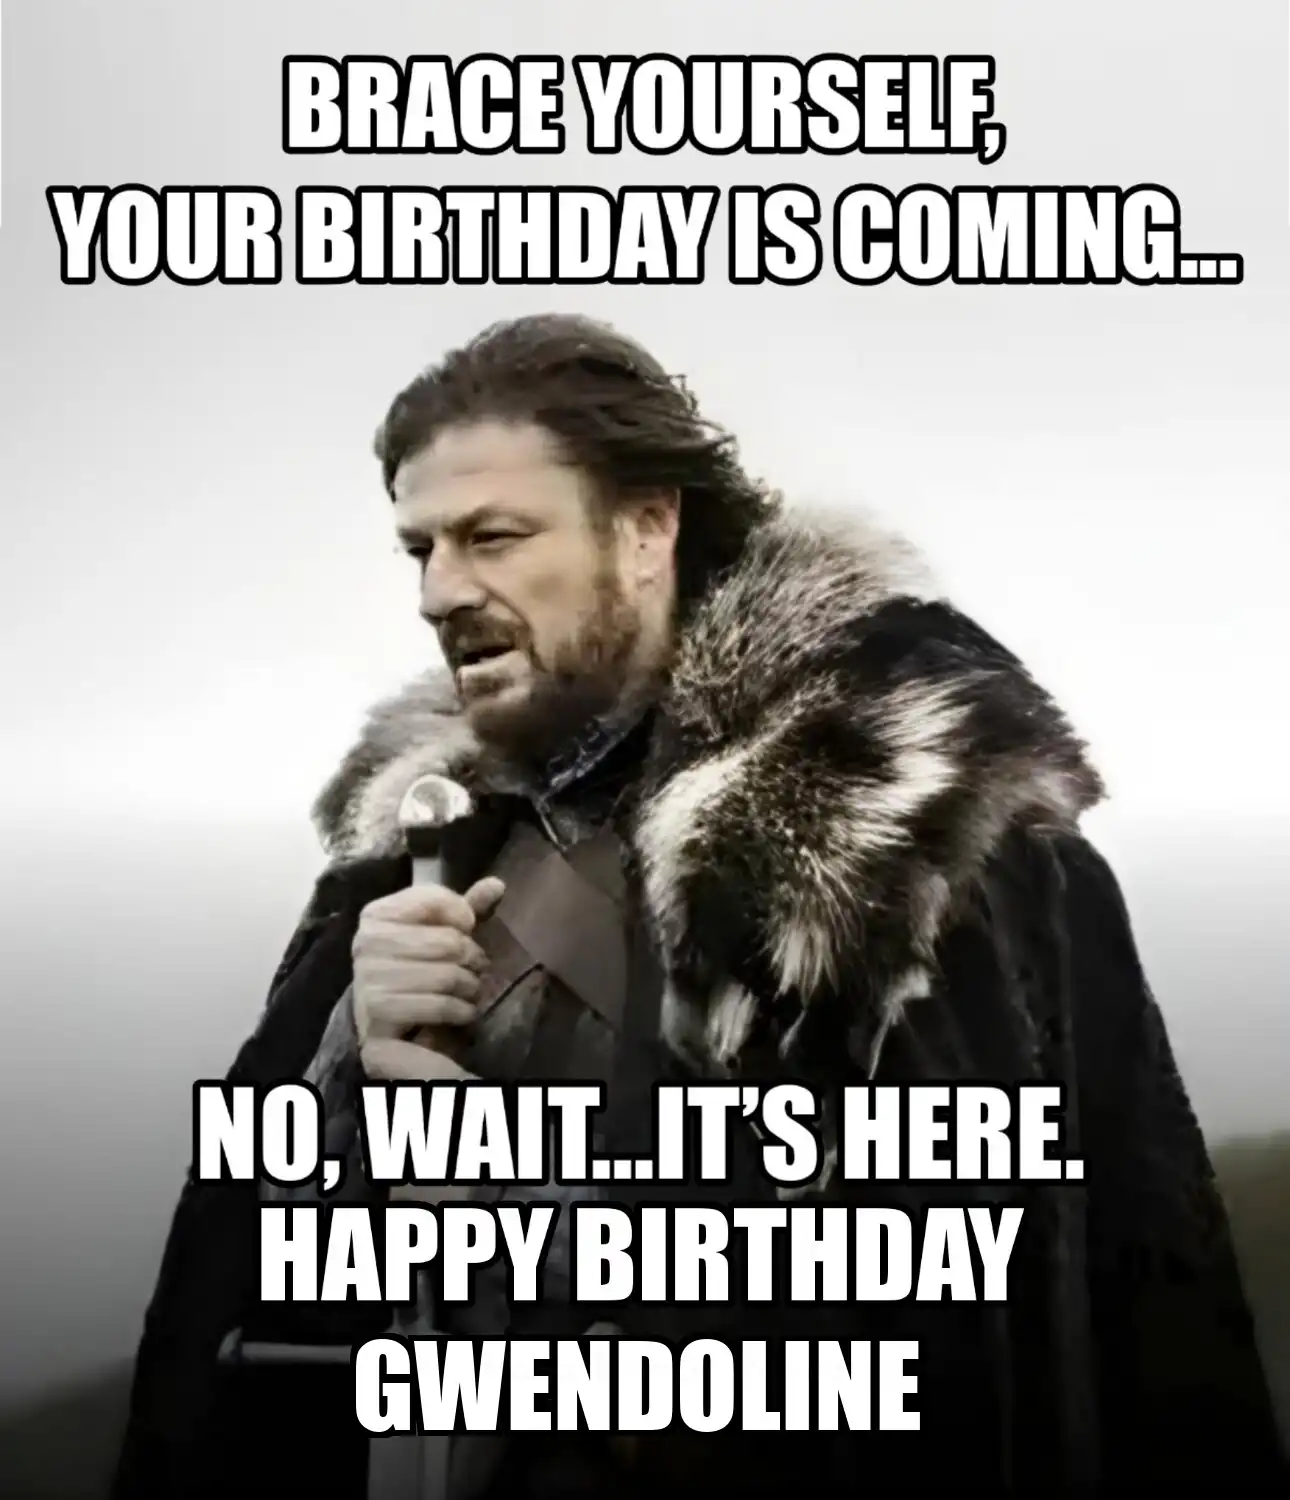 Happy Birthday Gwendoline Brace Yourself Your Birthday Is Coming Meme